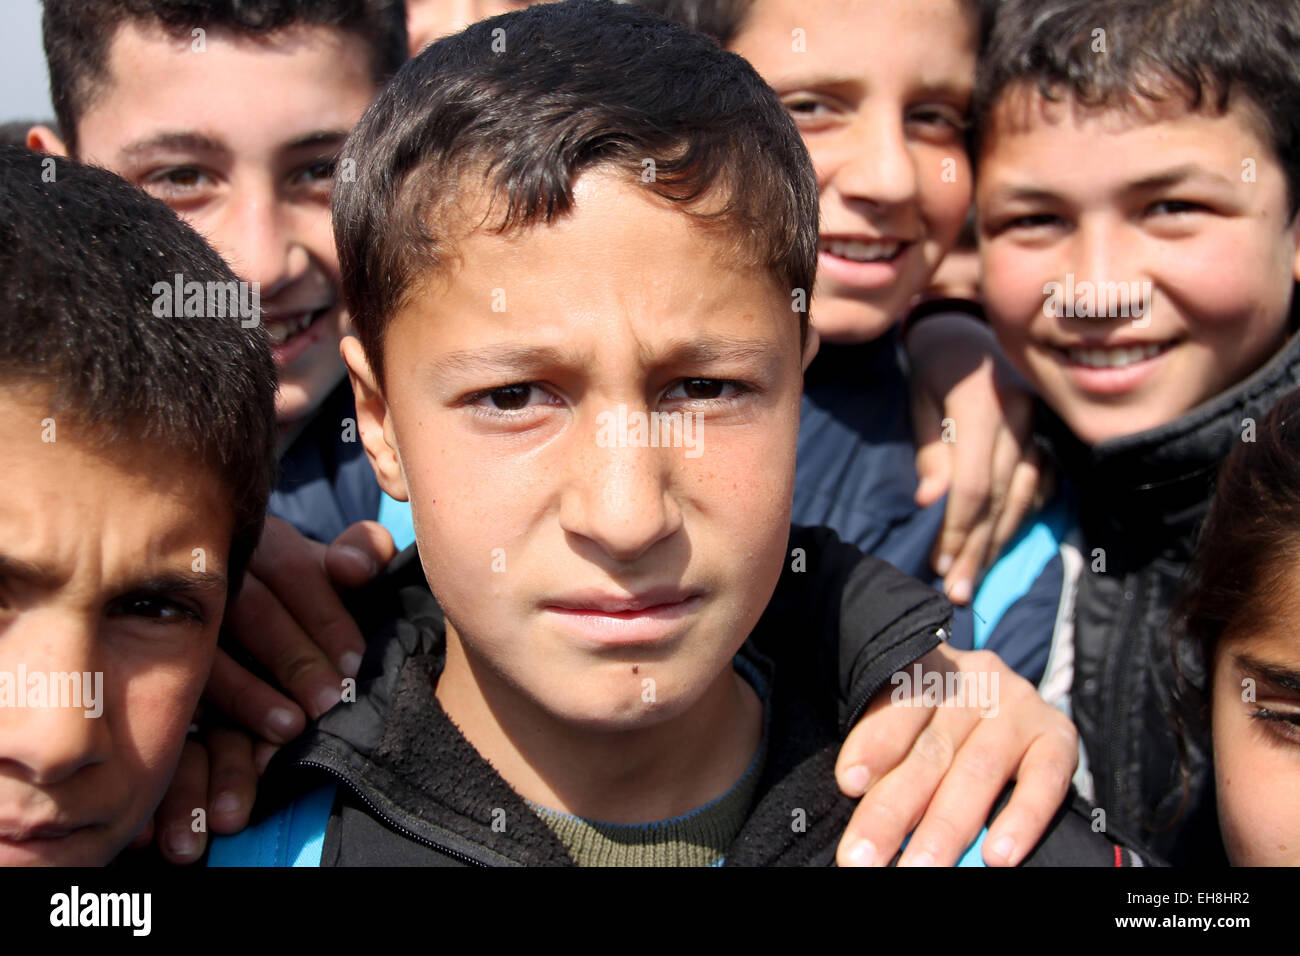 Kahramanmaras, Turkey. 3rd Mar, 2015. Mohammad (C) from Syria stands surrounded by his friends in the refugee camp in Kahramanmaras, Turkey, 3 March 2015. More than 3.8 million Syrians have escaped the civil war in Syria since the beginning of the war four years ago on Sunday 15th March. Mohammad, who would like to become a physician, is one of 1, 6 million refugees who have found refuge in Turkey. No other country has been harbouring more refugees. The situation of Syrian refugees, however, remains hopeless despite the Turkey's strong efforts. Photo: Can Merey/dpa/Alamy Live News Stock Photo